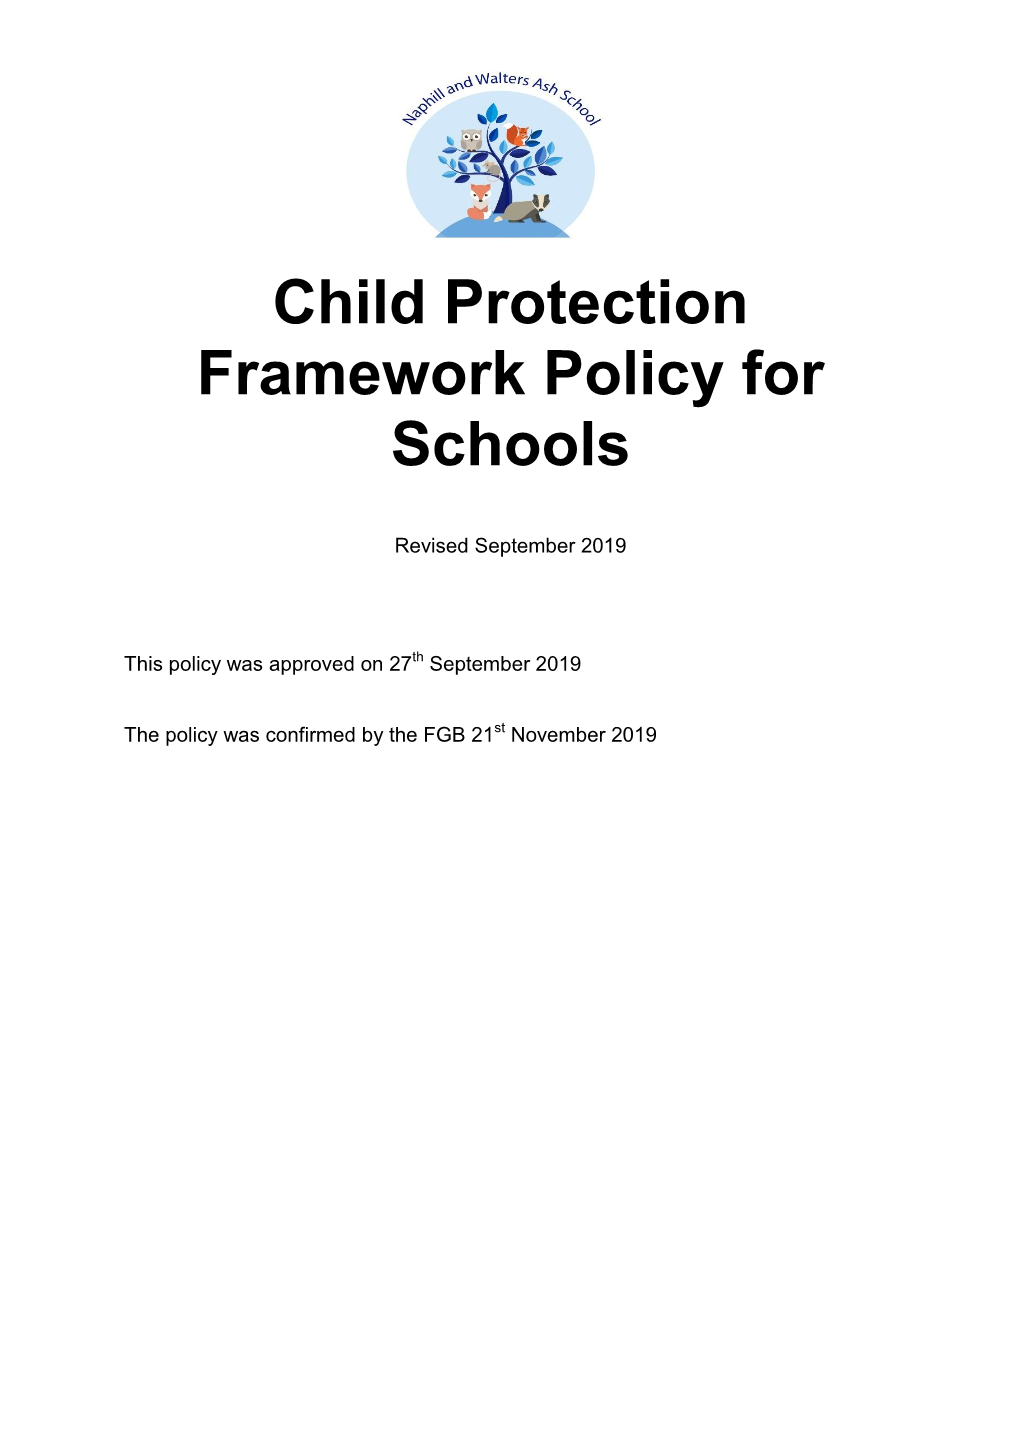 Child Protection Framework Policy for Schools